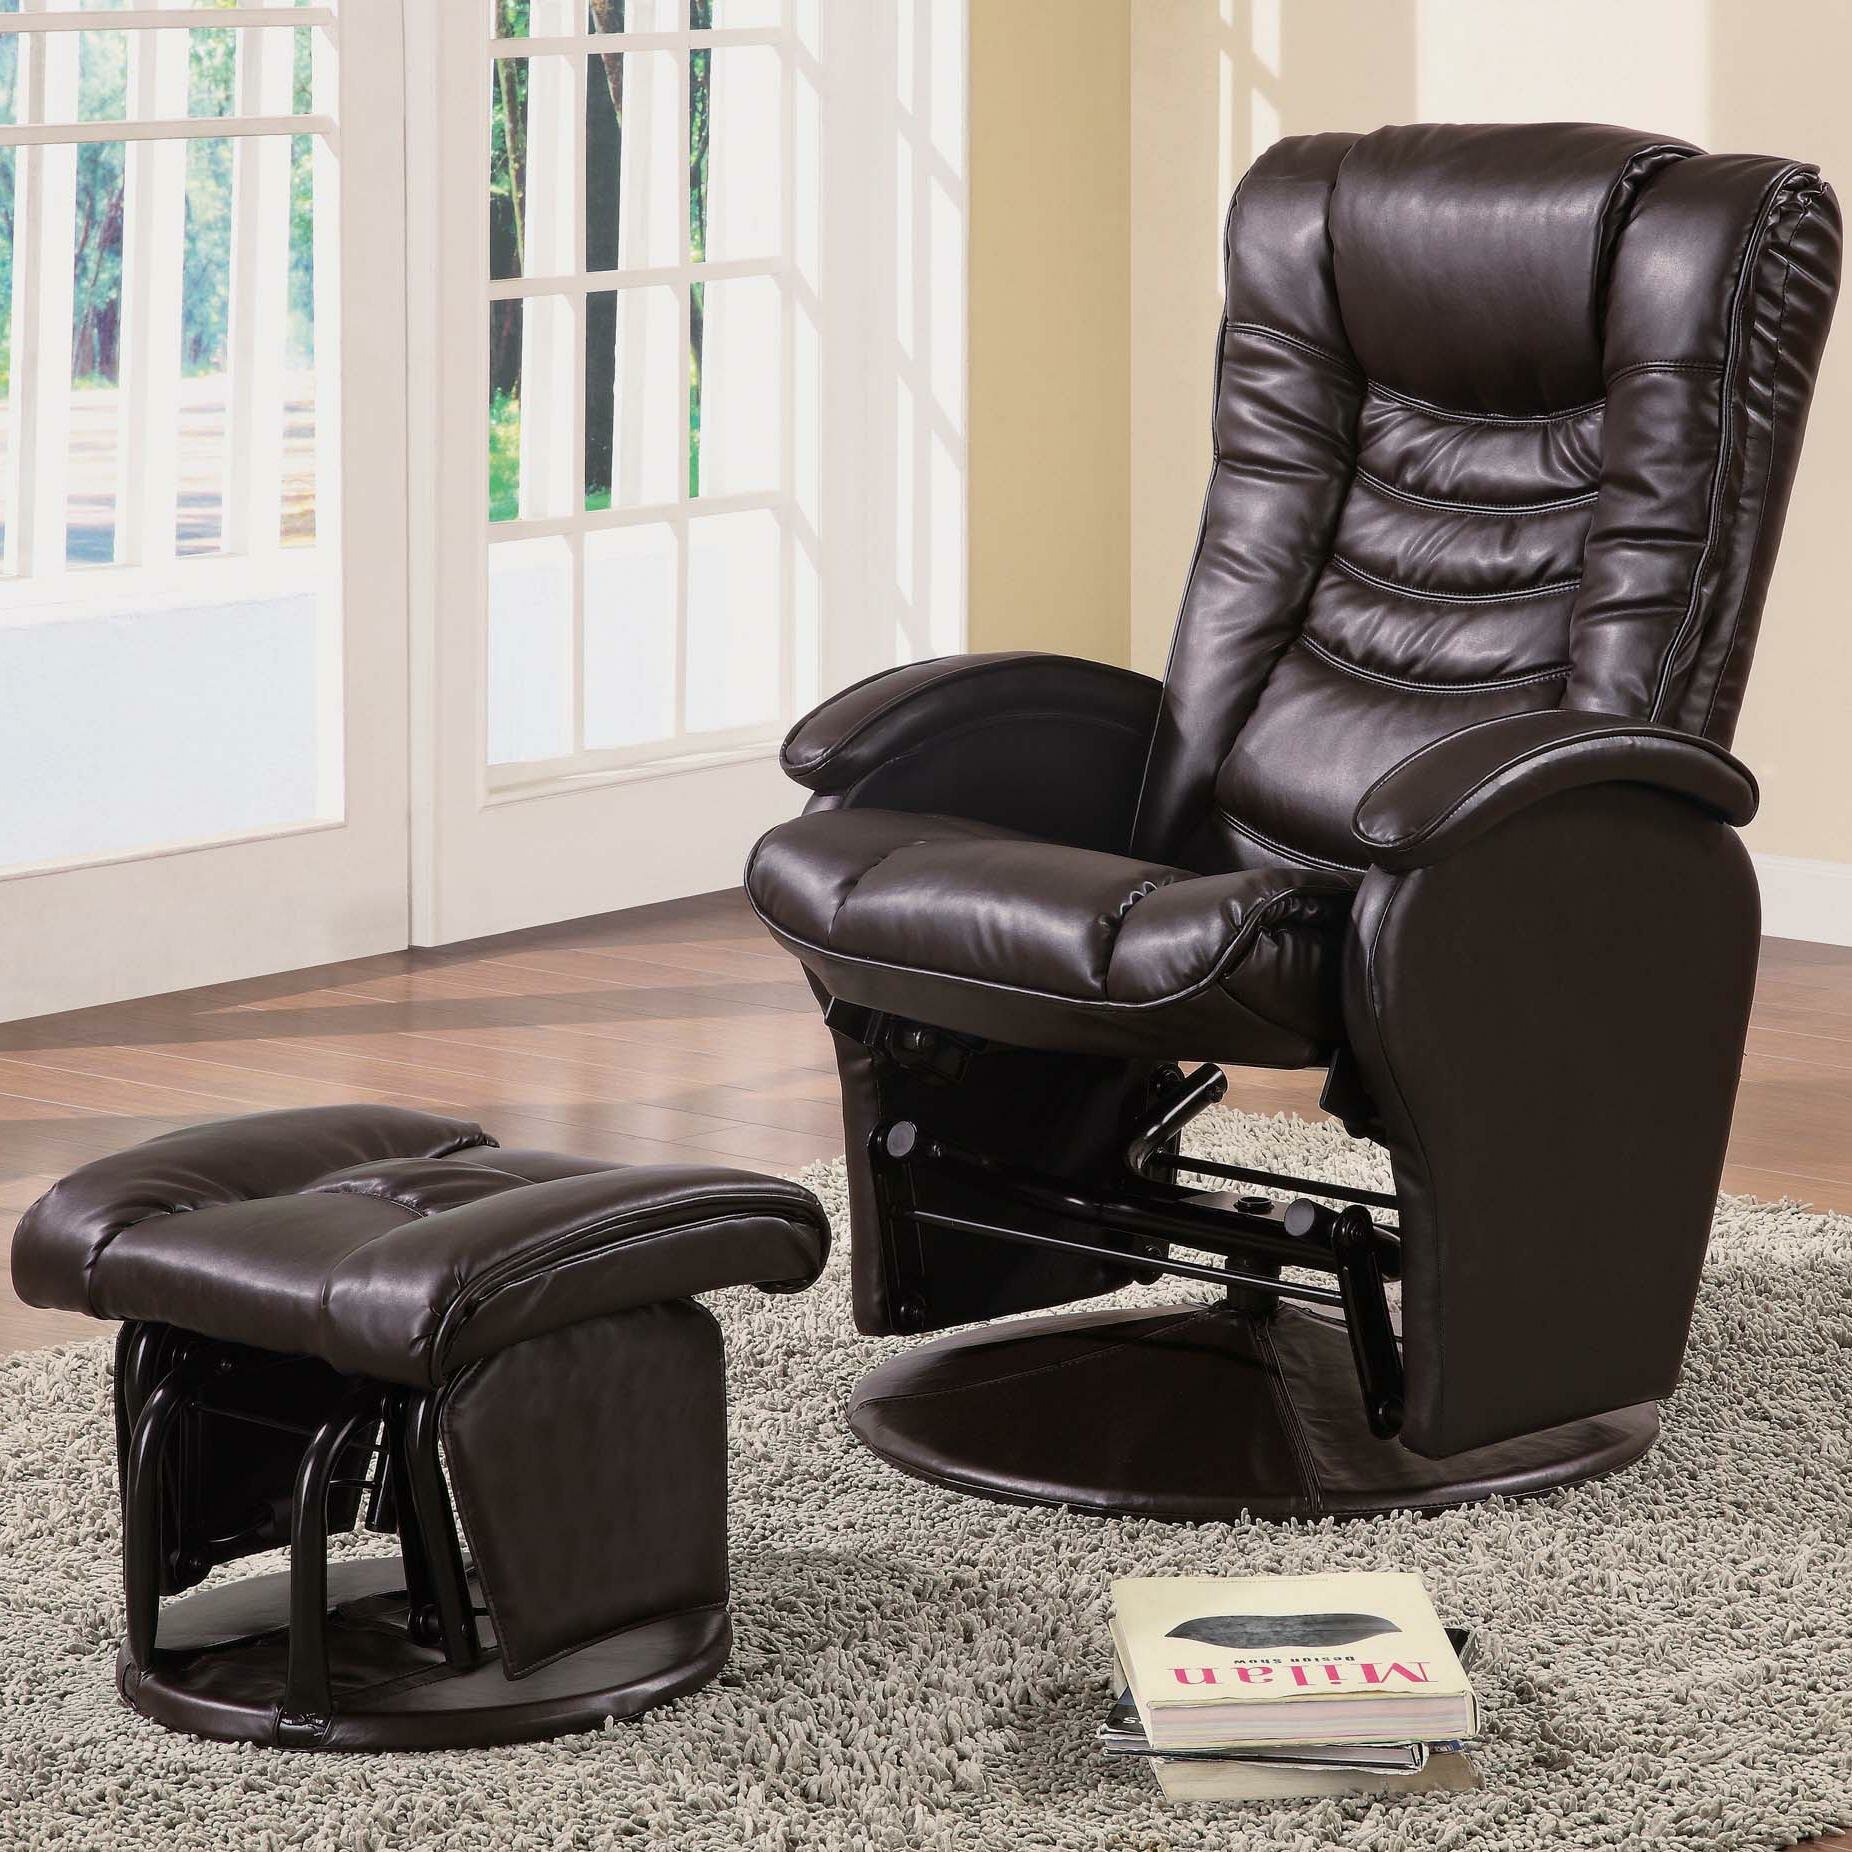 glider recliners coaster recliners with ottomans glider recliner with ottoman - item number: 600165 AHLKGFX